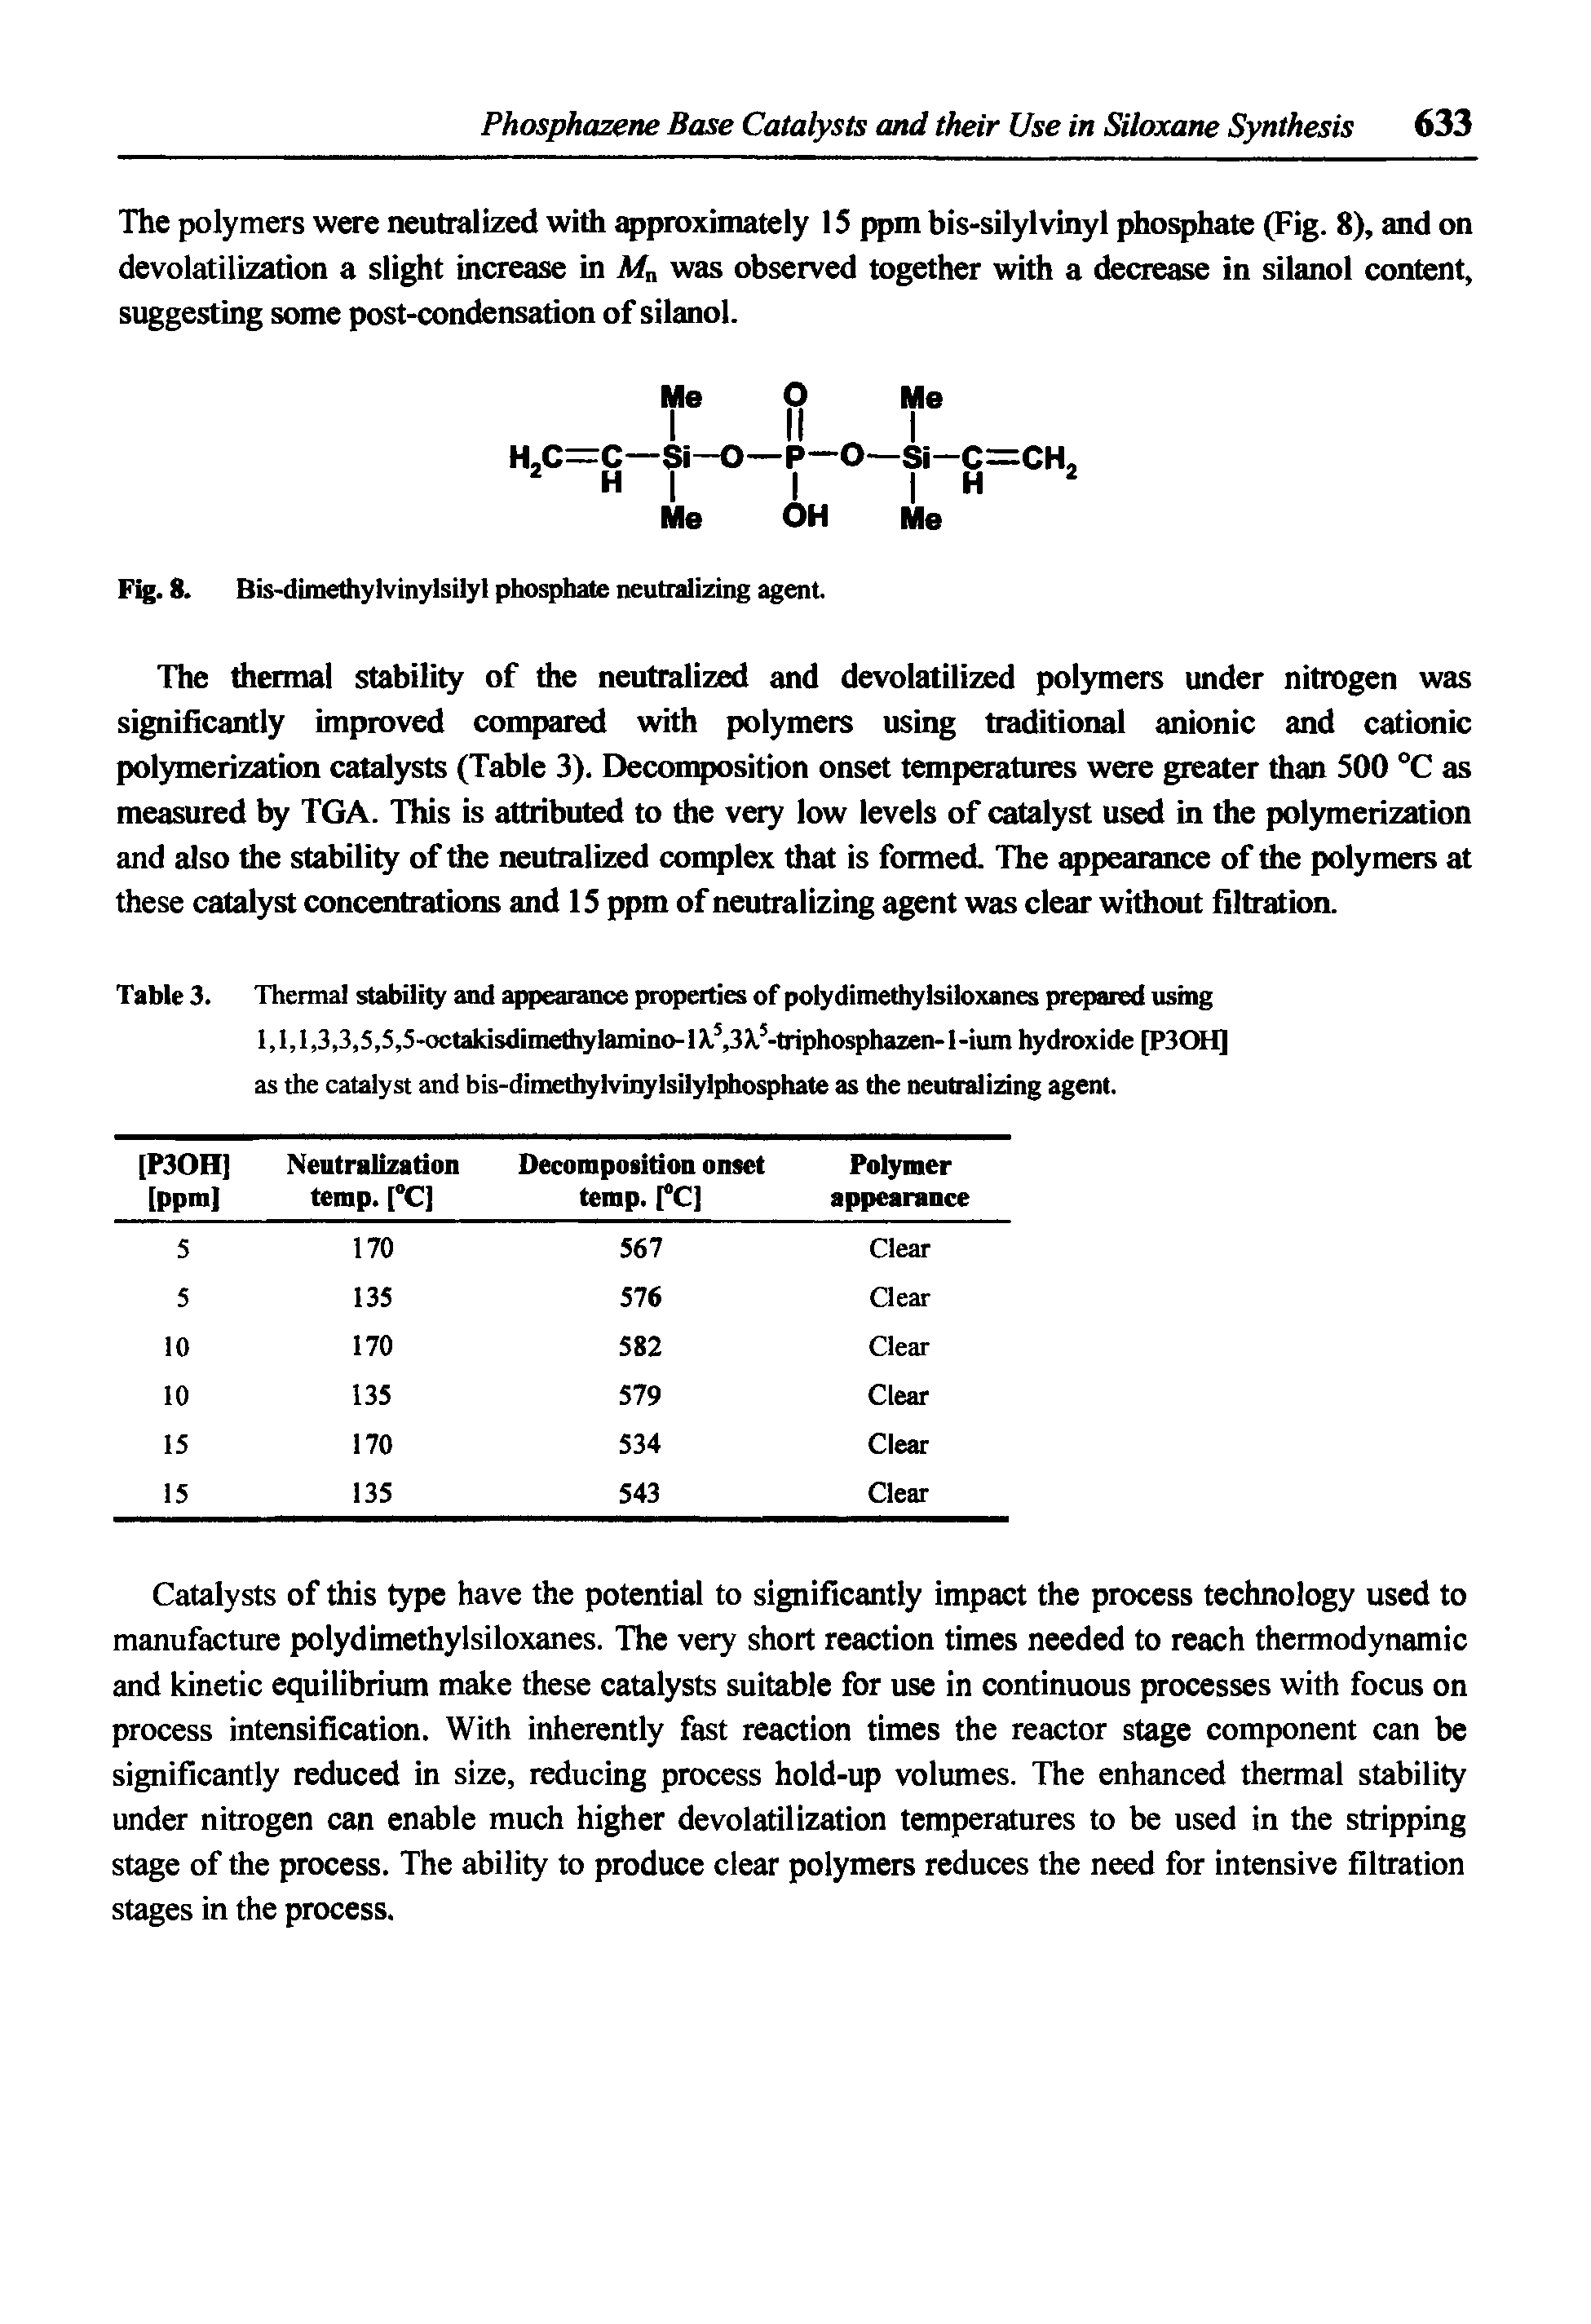 Table 3. Thermal stability and appearance properties of polydimethylsiloxanes prepared using l,l,l,3,3,5,5,5-octakisdimettiylaniino-lX ,3X, -triphosphazen-l-ium hydroxide [P30H] as the catalyst and bis-dimethylvinylsilylphosphate as the neutralizing agent.